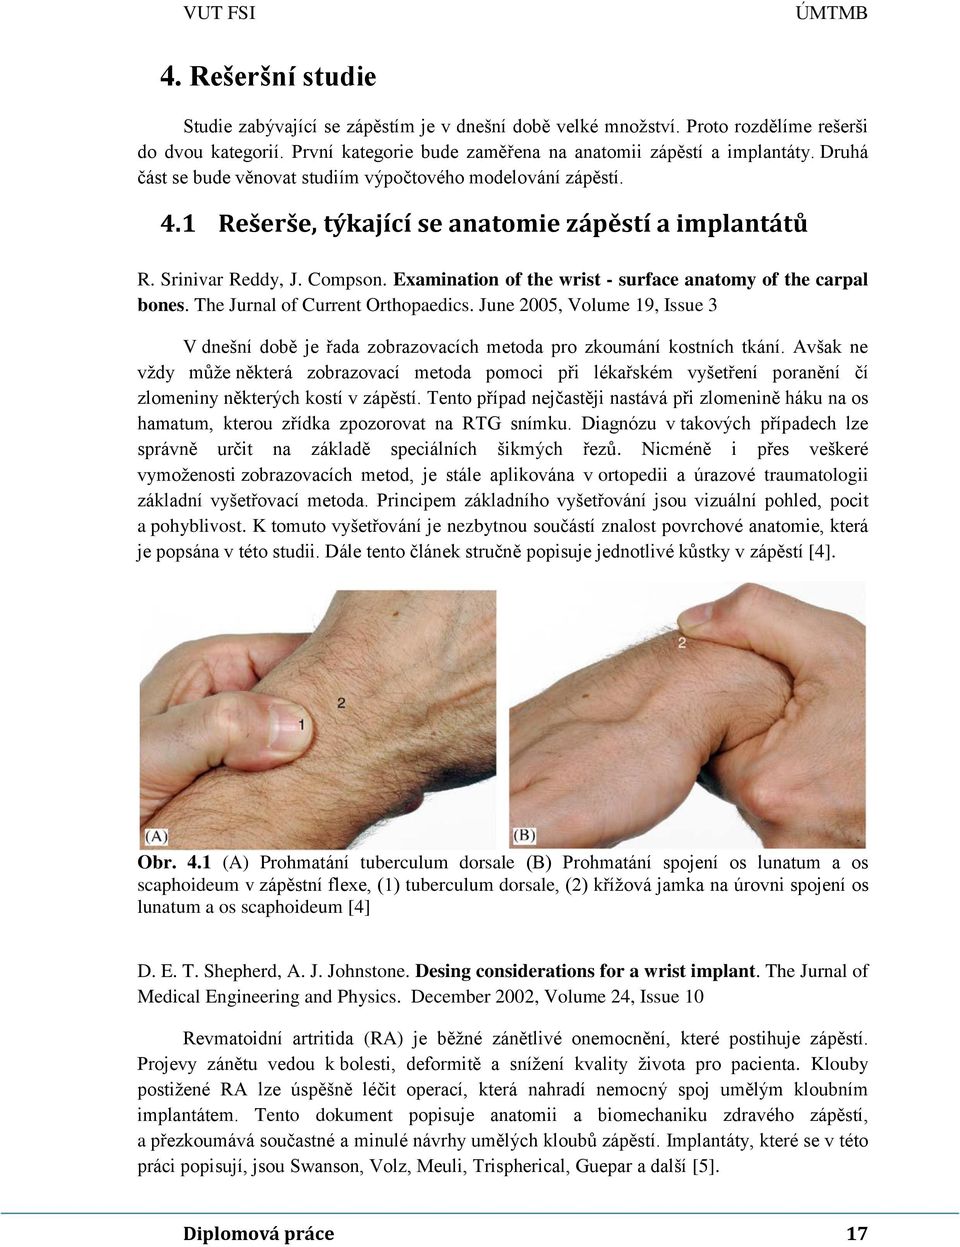 Examination of the wrist - surface anatomy of the carpal bones. The Jurnal of Current Orthopaedics.